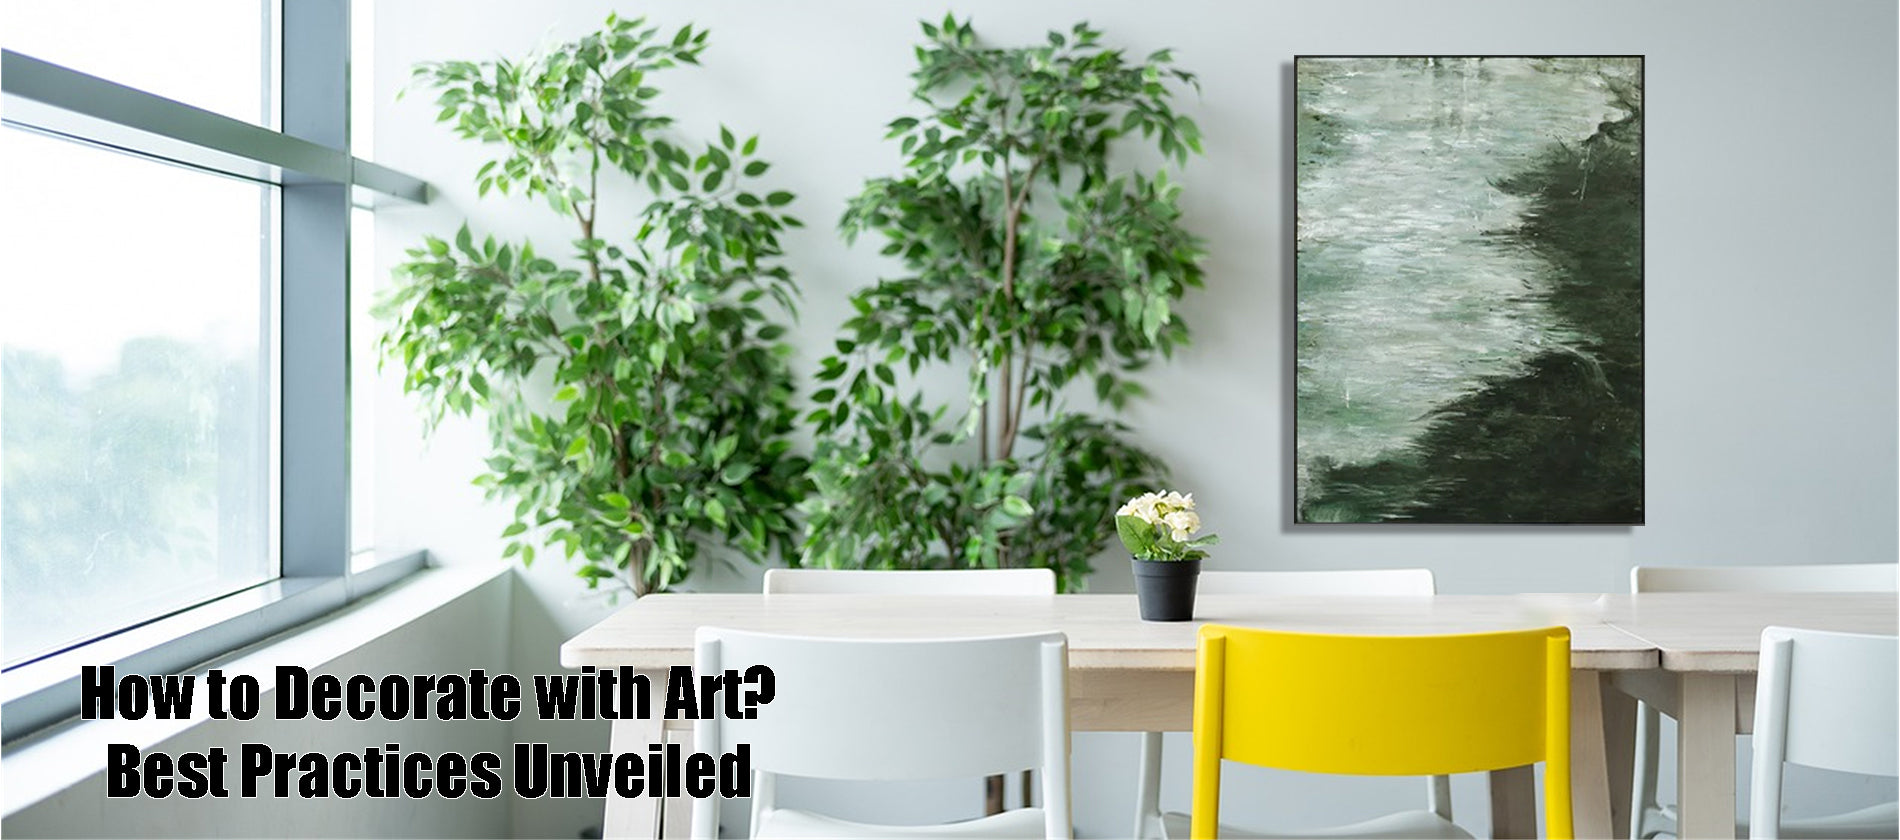 How to Decorate with Art? Best Practices Unveiled